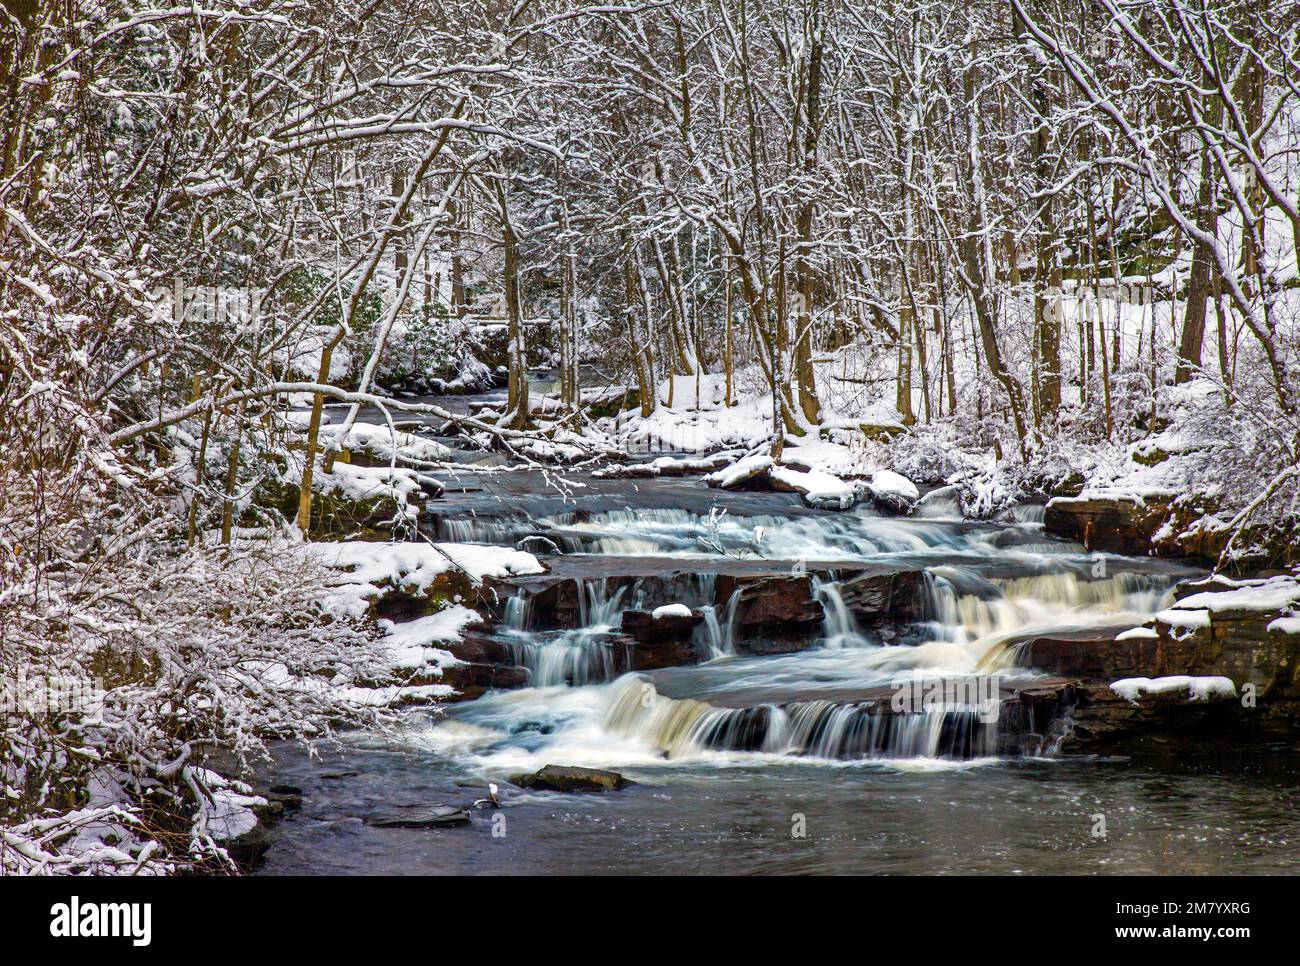 Cascades along the West Branch Wallenpaupack Creek a tributary of the Delaware River in Wayne County, Pennsylvania Stock Photo